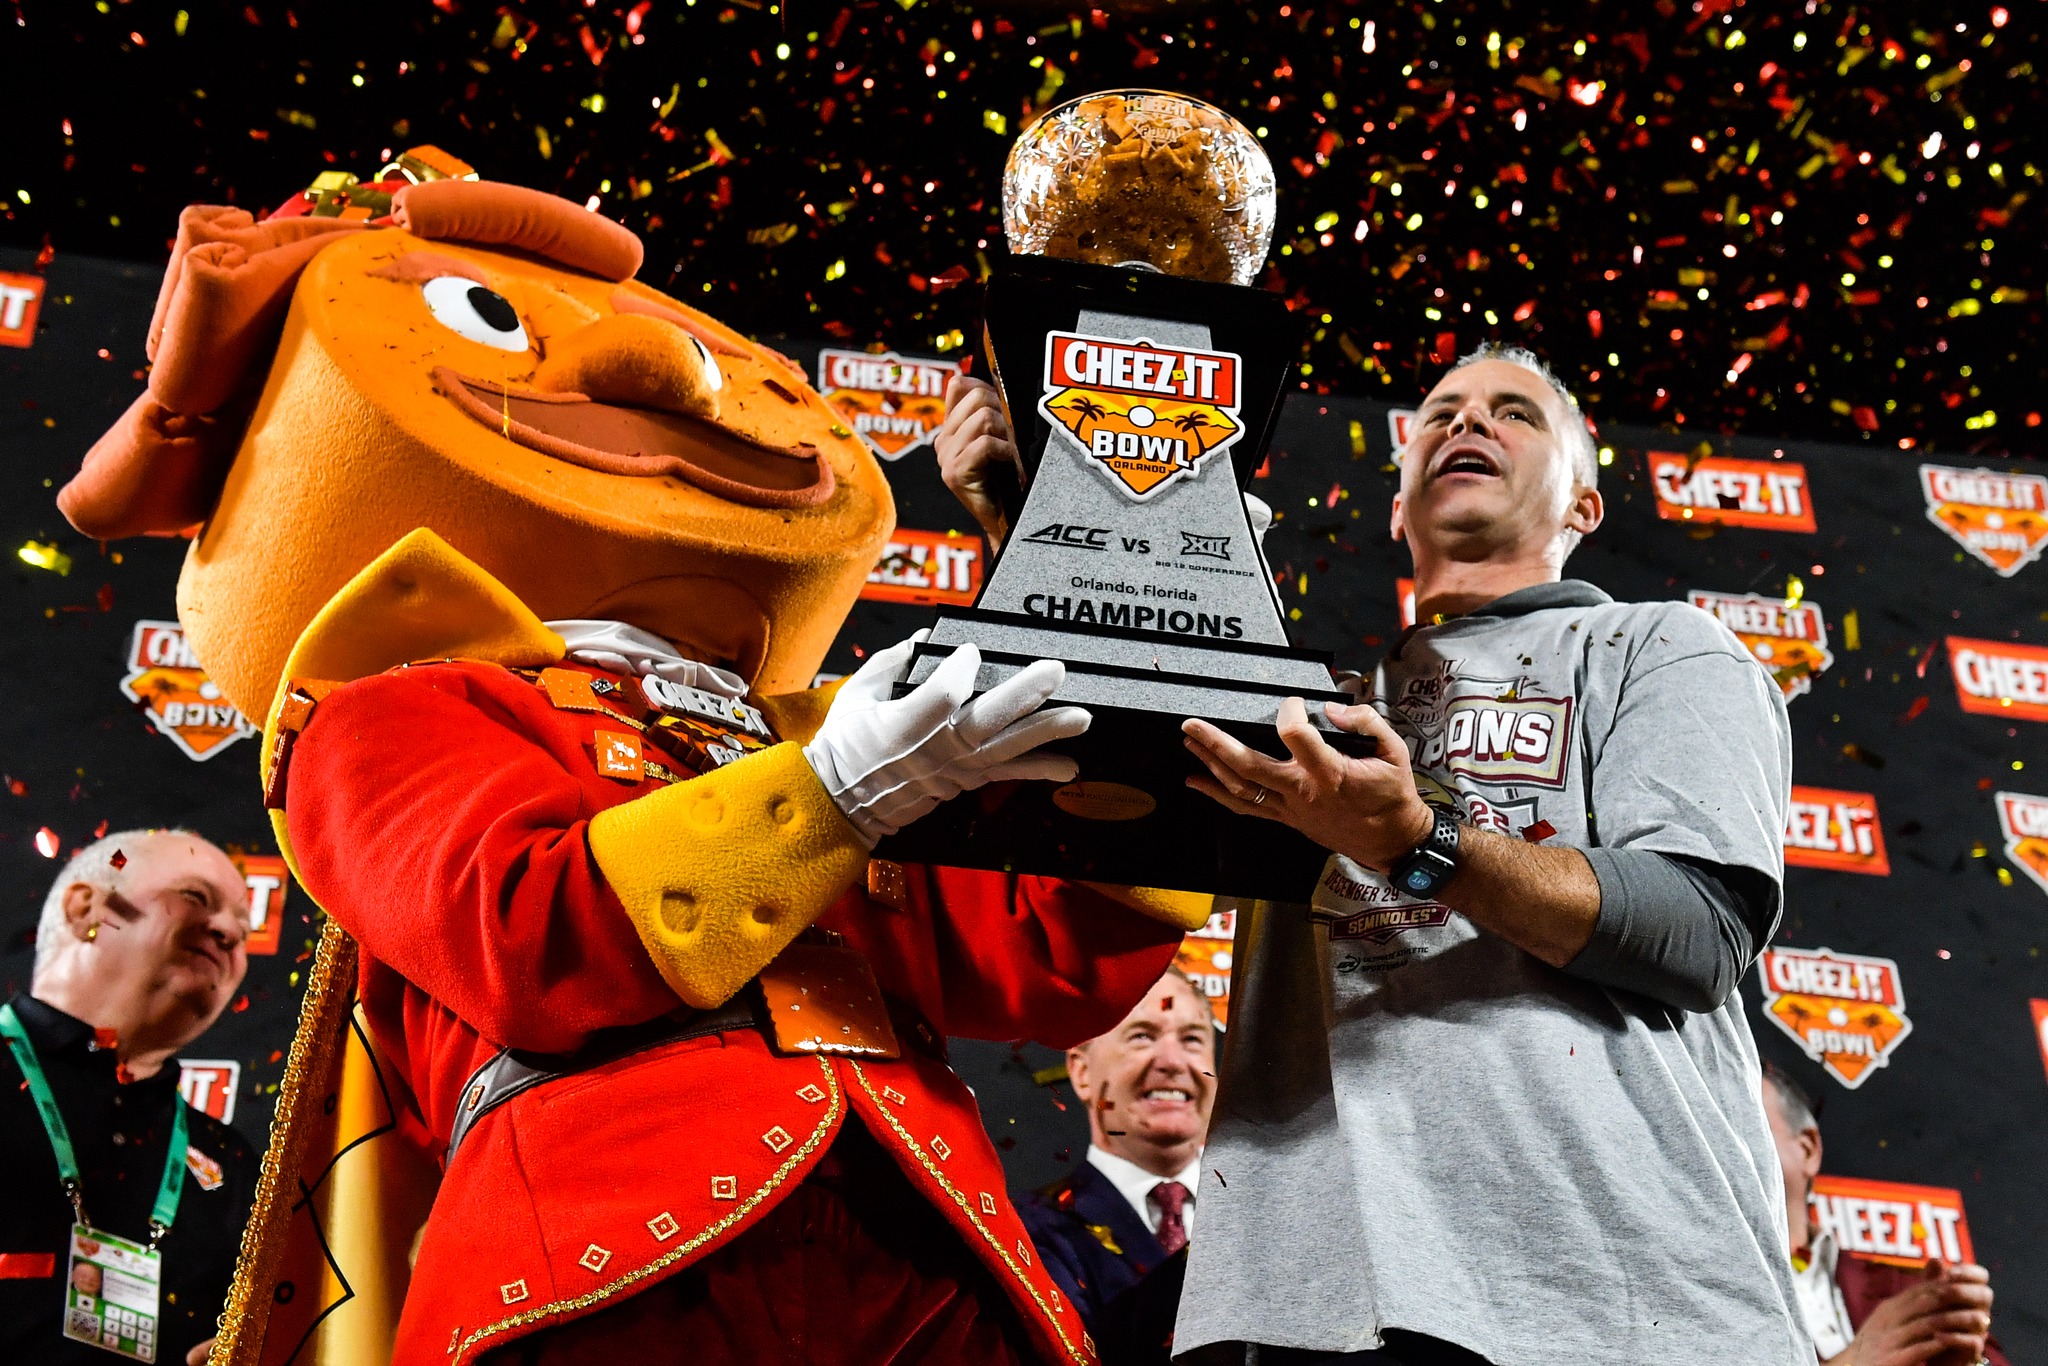 Florida State coach Mike Norvell is presented the Cheez-It Bowl trophy after the Florida State Seminoles defeated the Oklahoma Sooners, 35-32, in the 2022 Cheez-It Bowl in Orlando, Thursday, December 29, 2022. Photo by Harry Castiblanco / Florida National News